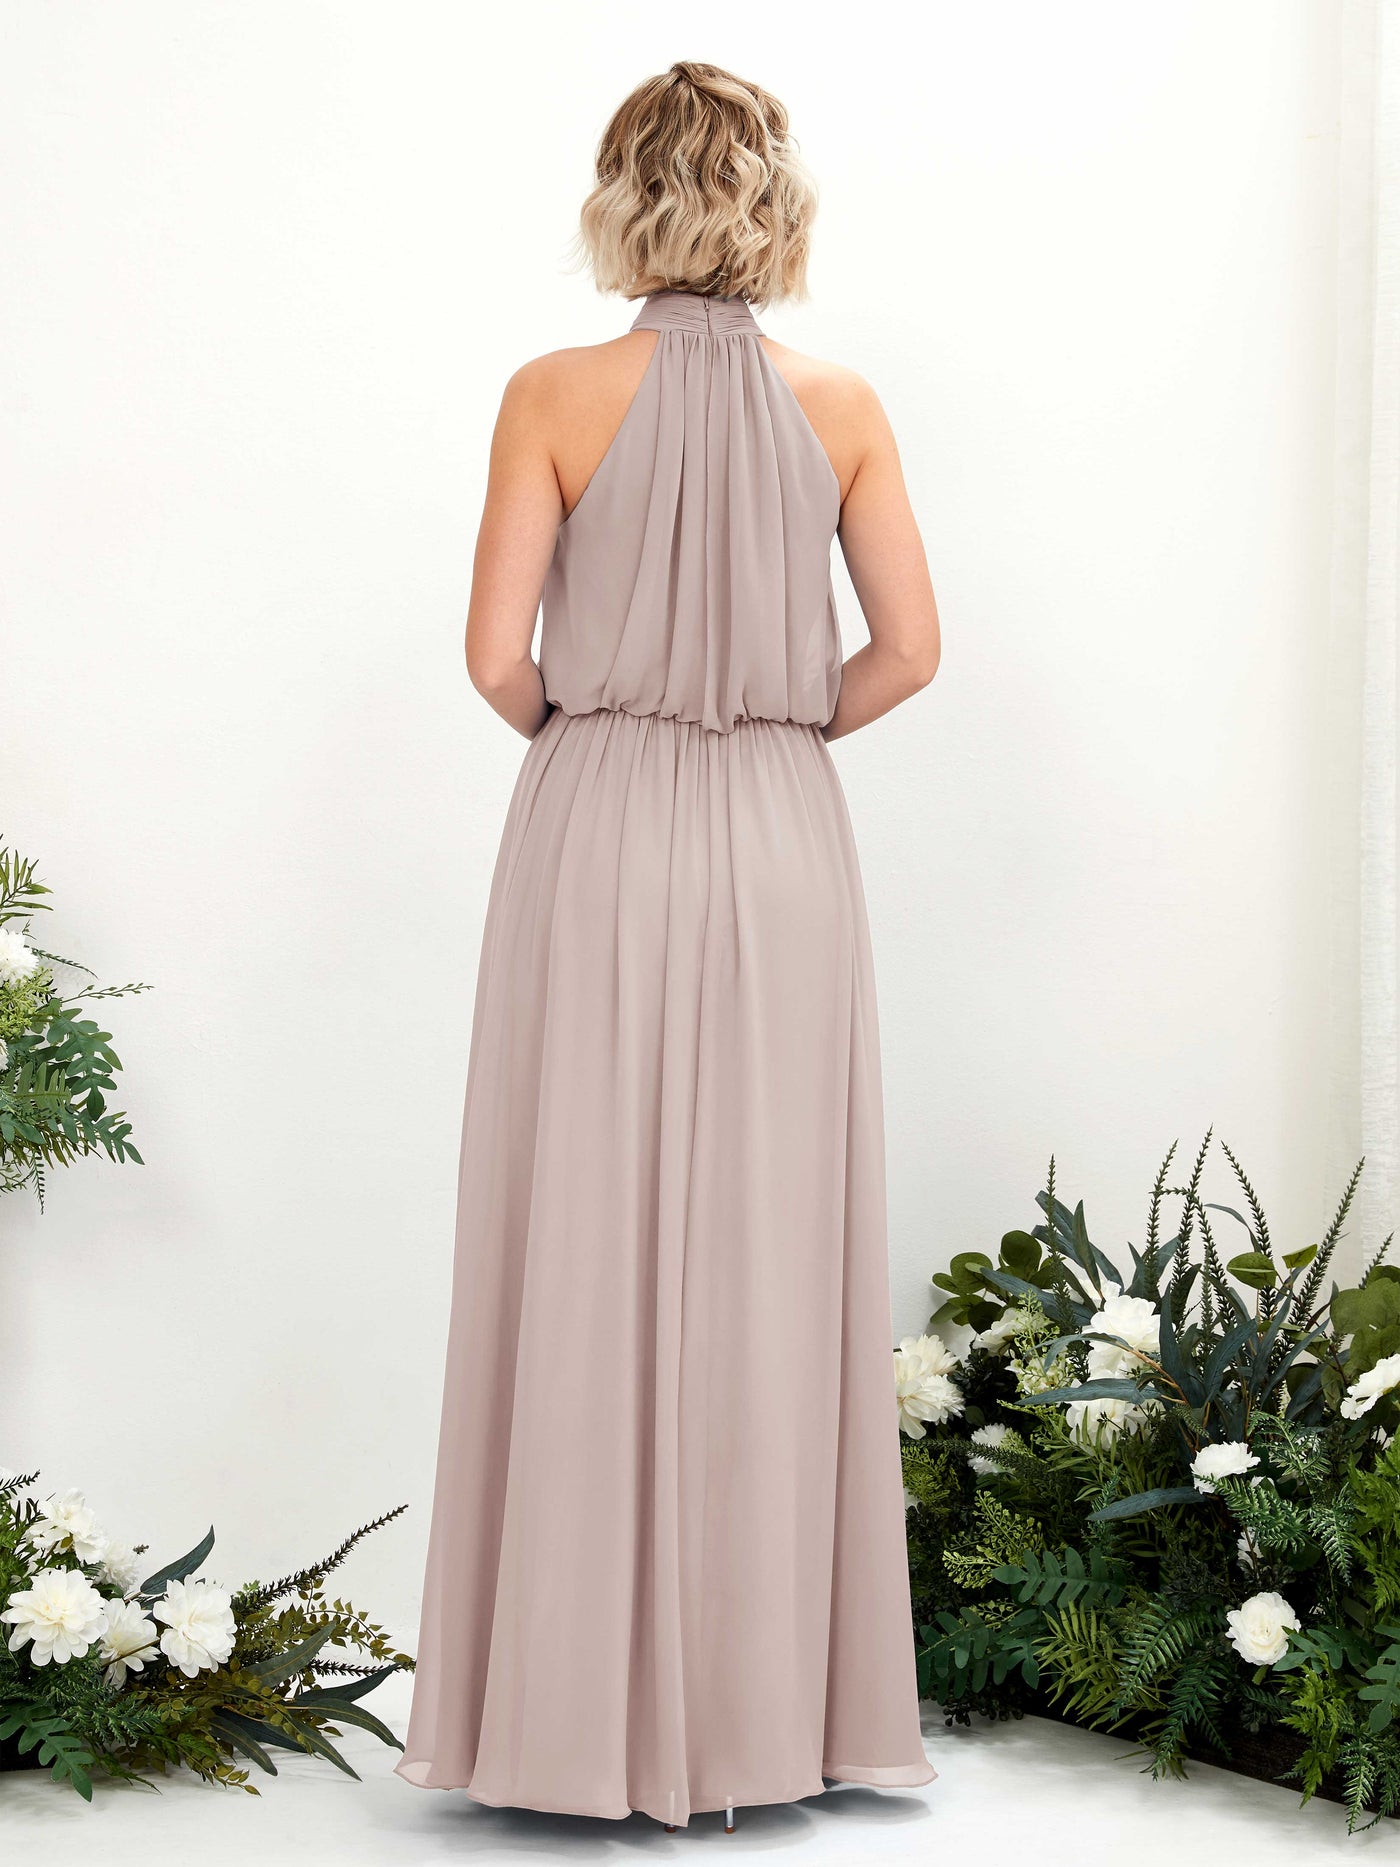 Taupe Bridesmaid Dresses Bridesmaid Dress A-line Chiffon Halter Full Length Sleeveless Wedding Party Dress (81222924)#color_taupe